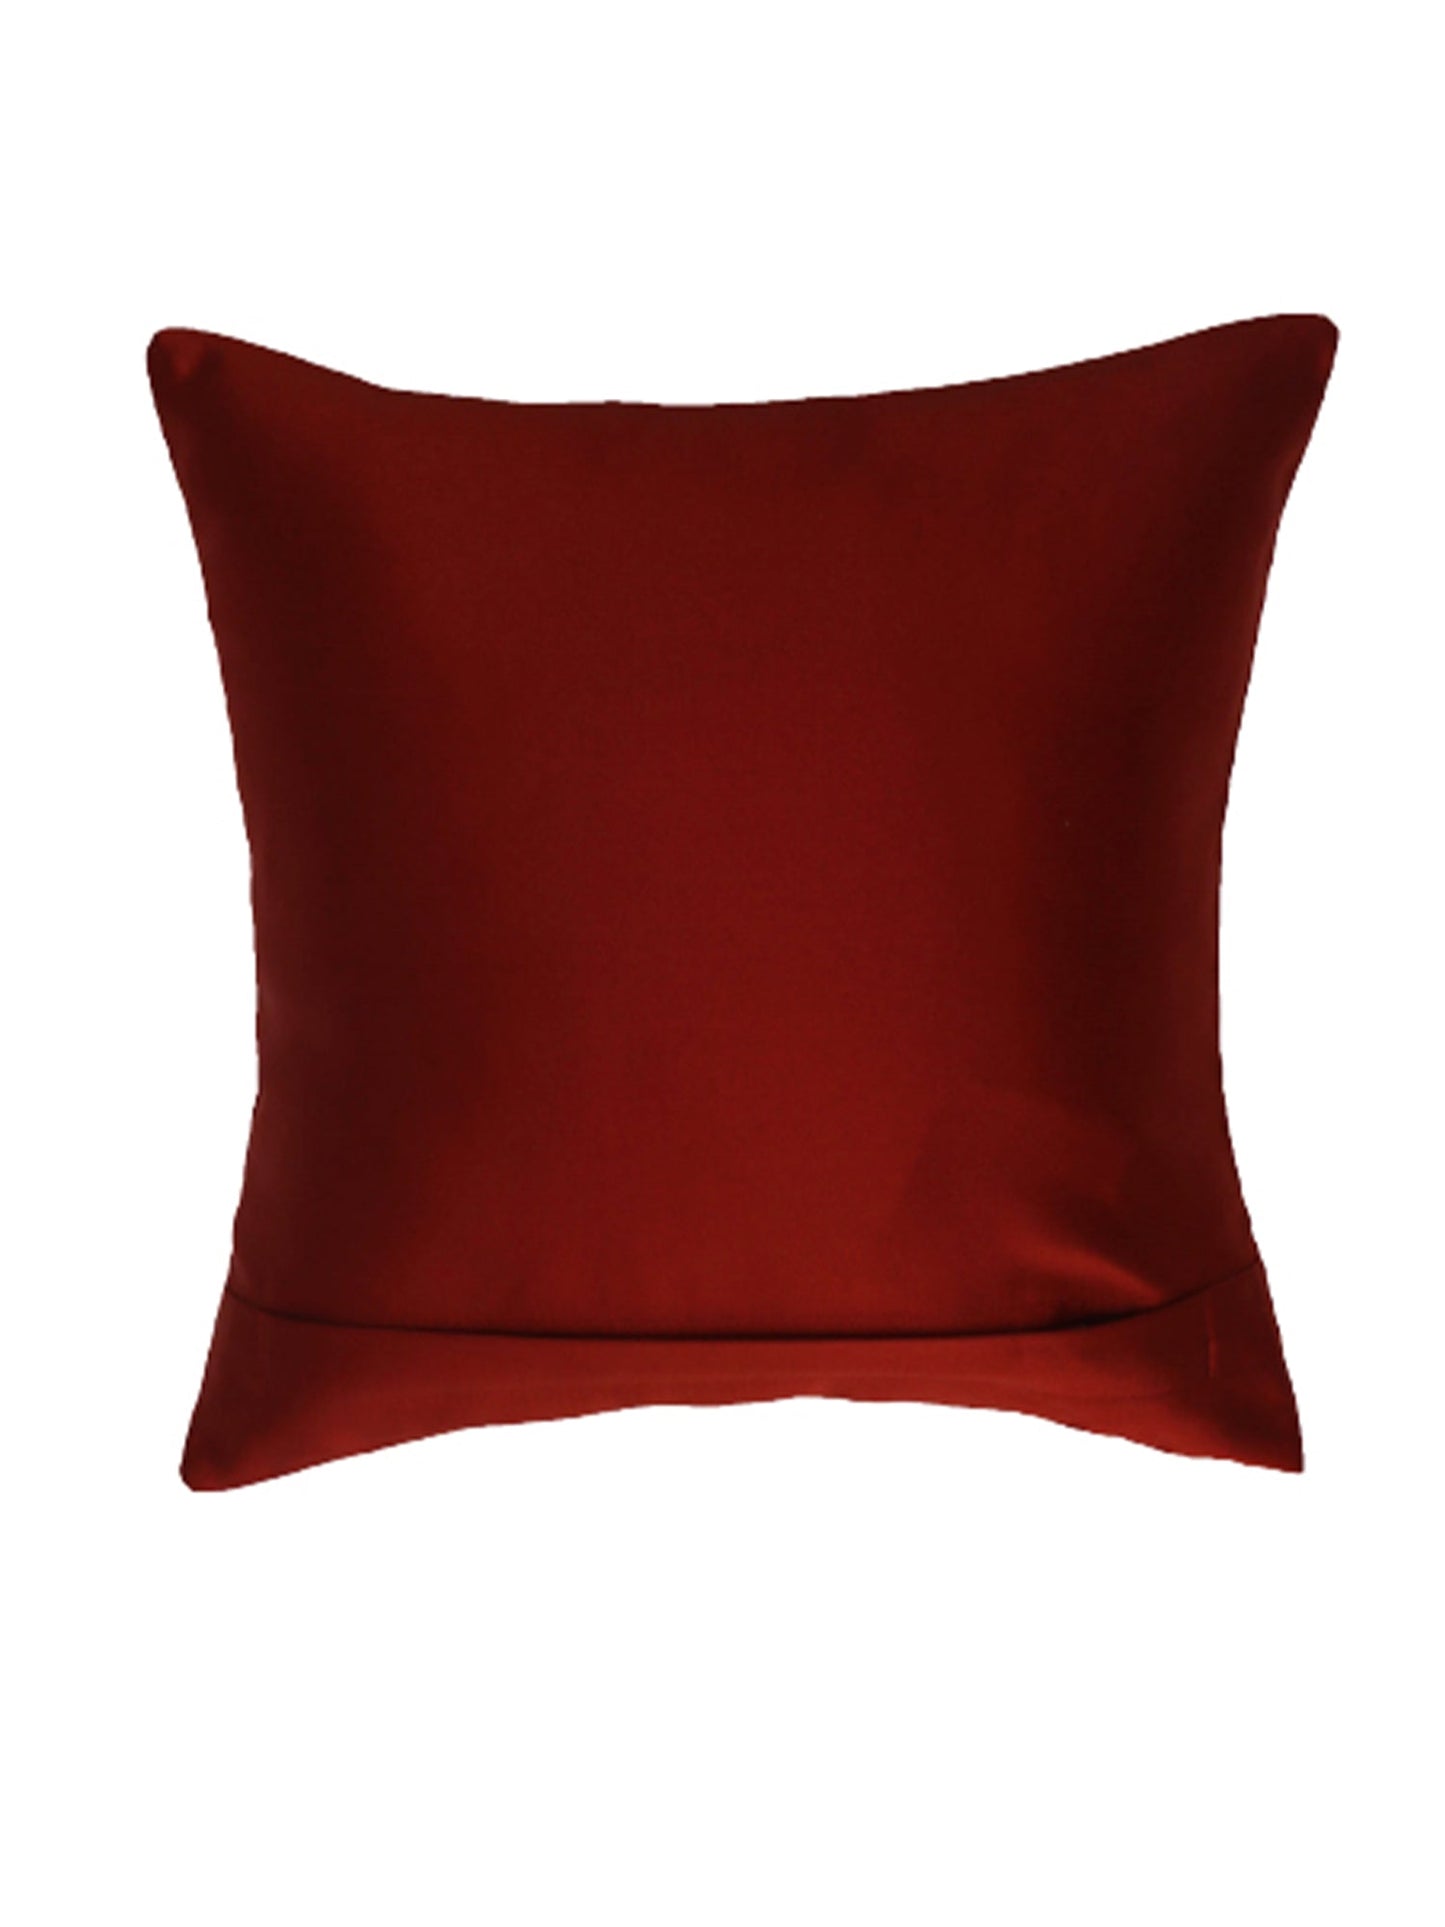 Cushion Cover 100% Polyester Solid Rust 12"X 12"